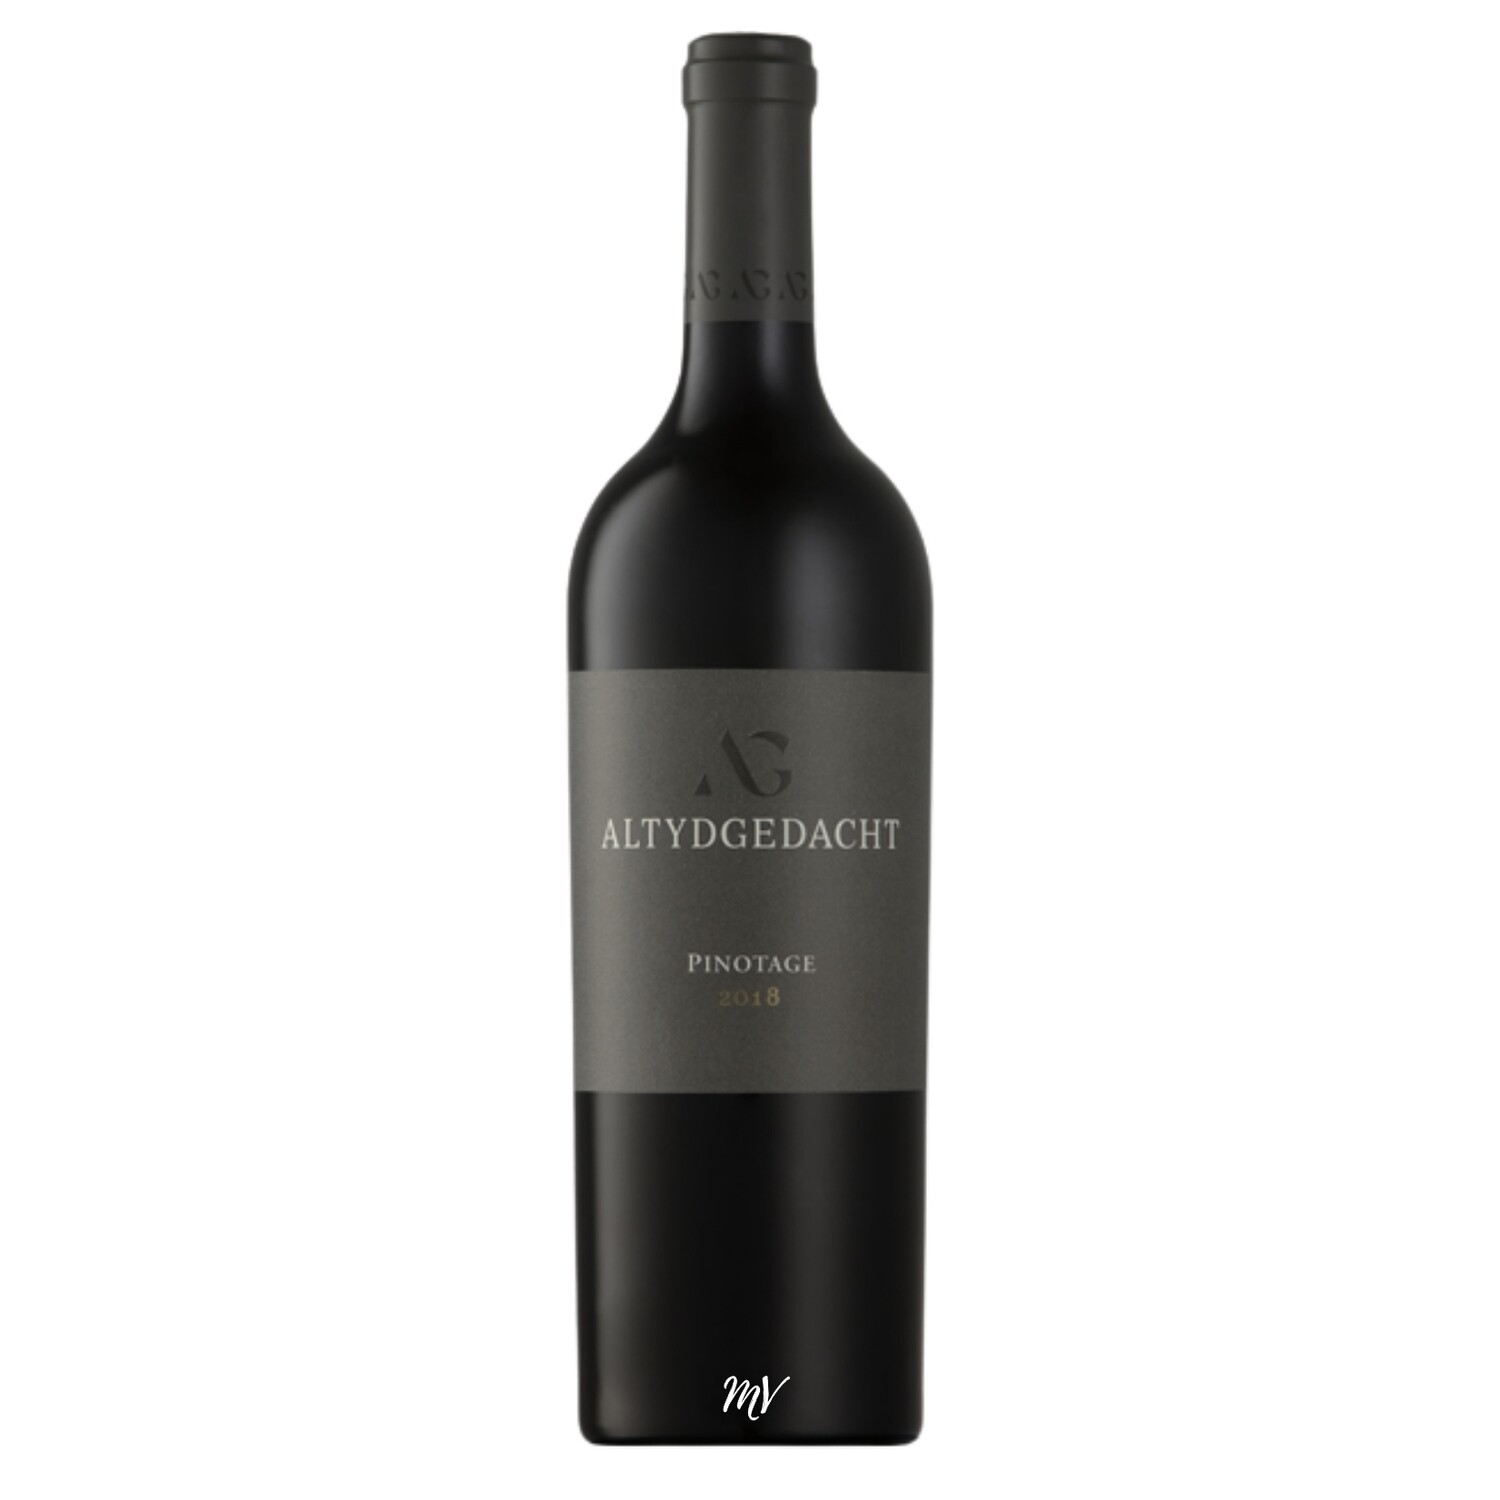 ALTYDGEDACHT PINOTAGE